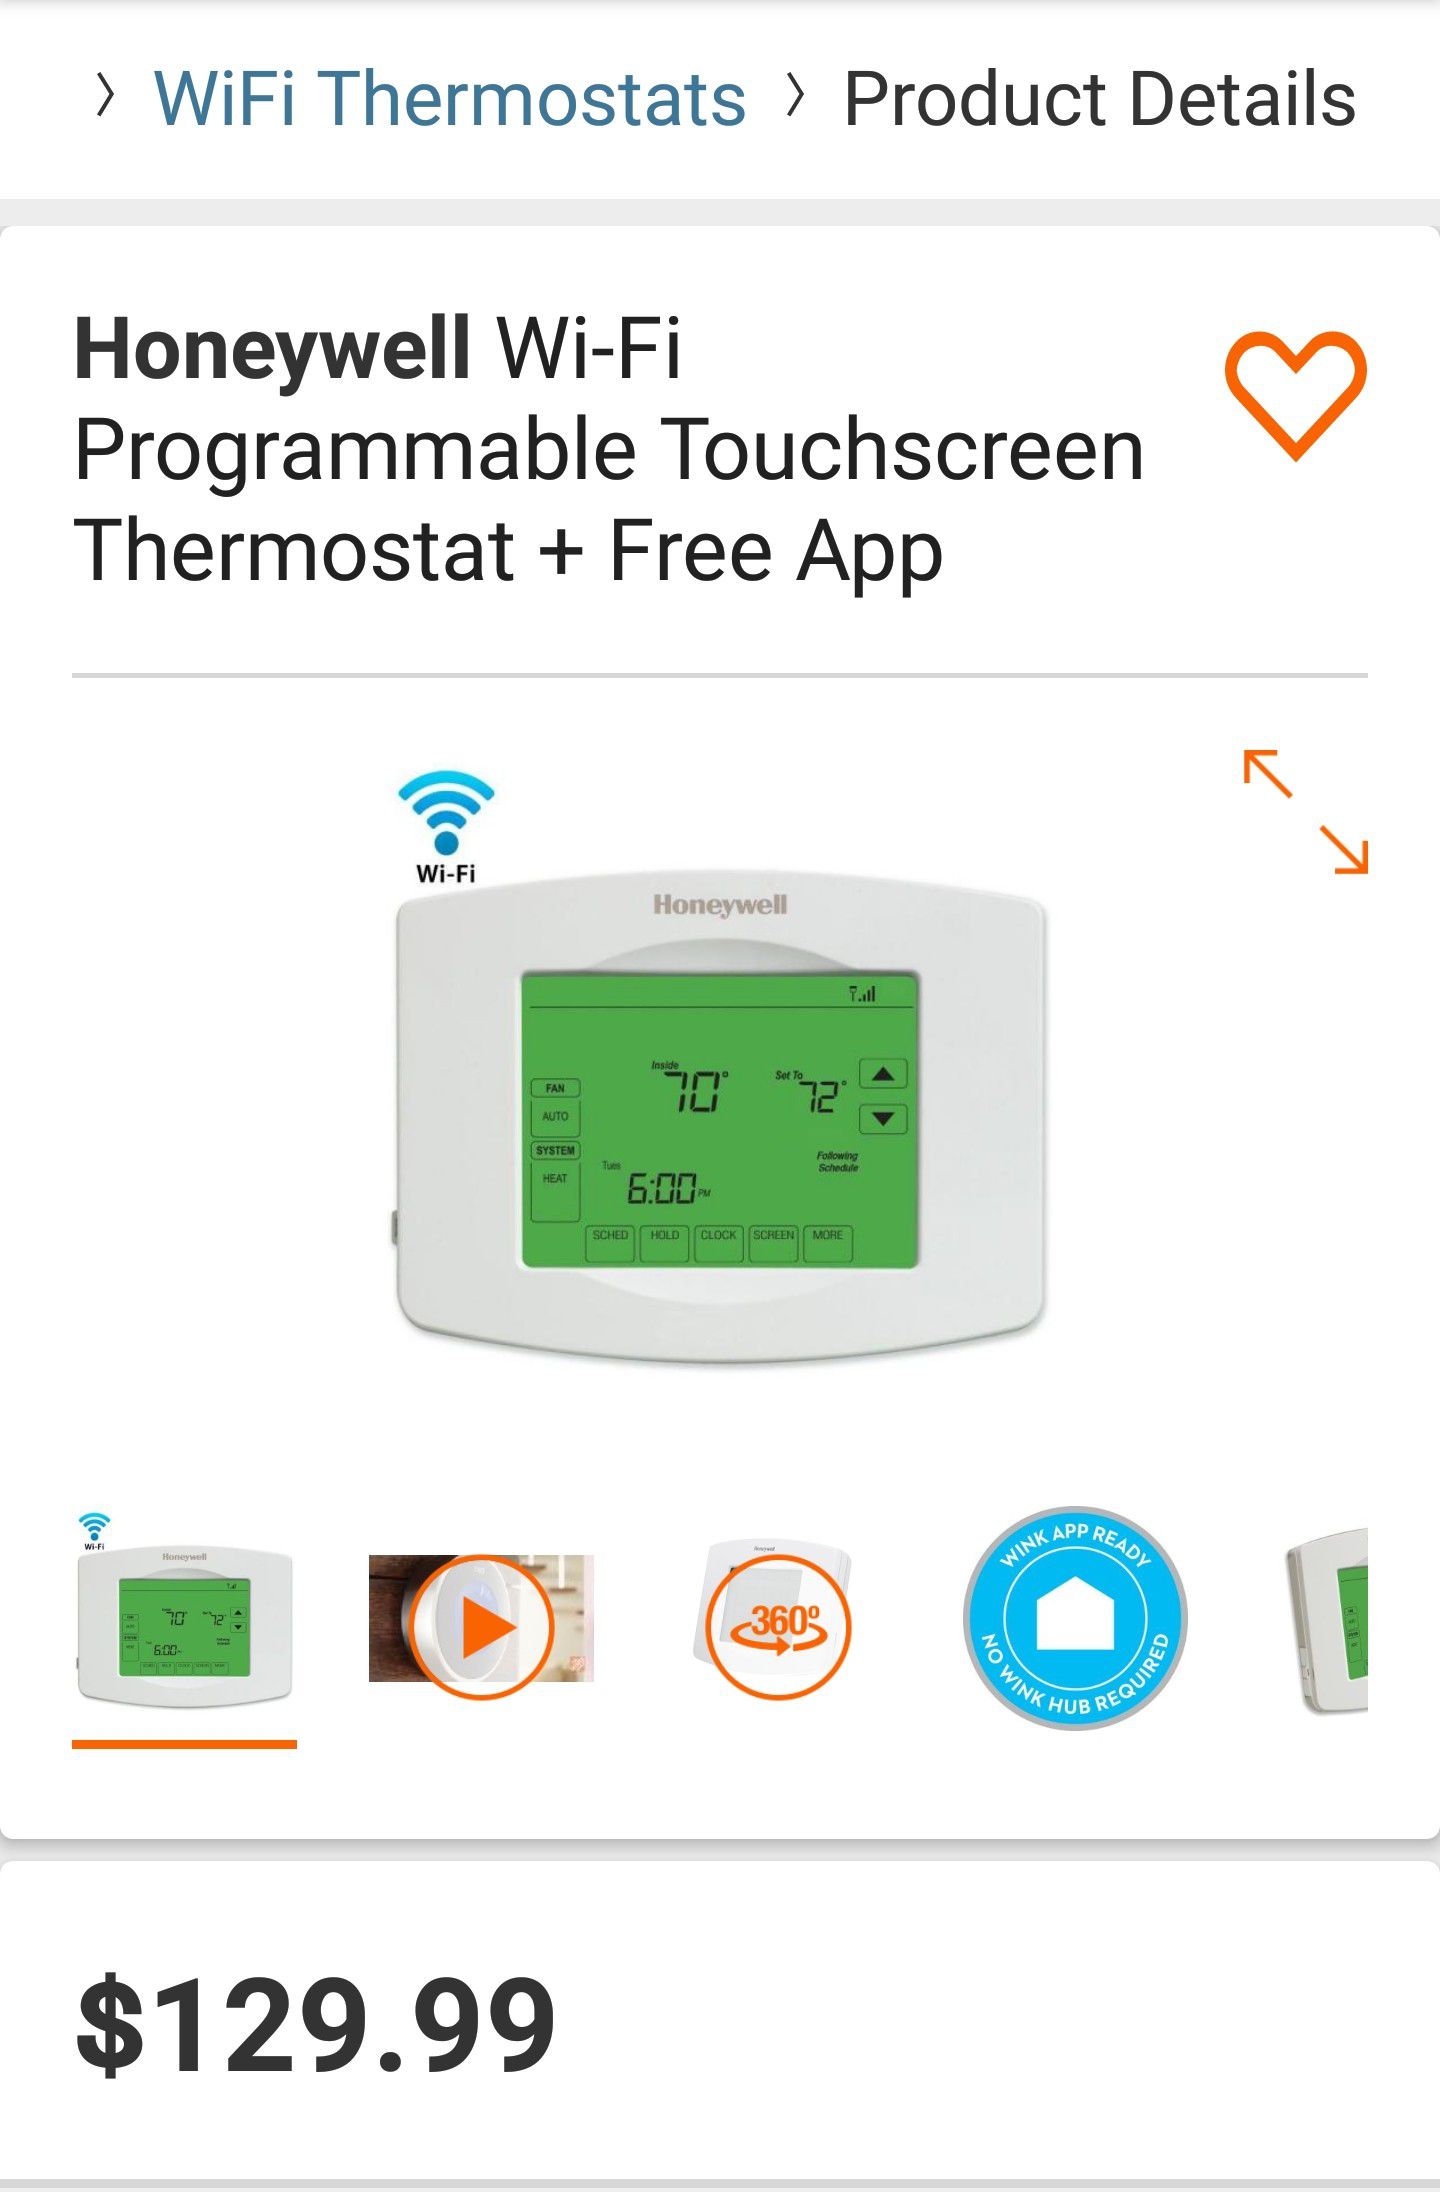 Wi-Fi Programmable Touchscreen Thermostat + Free App